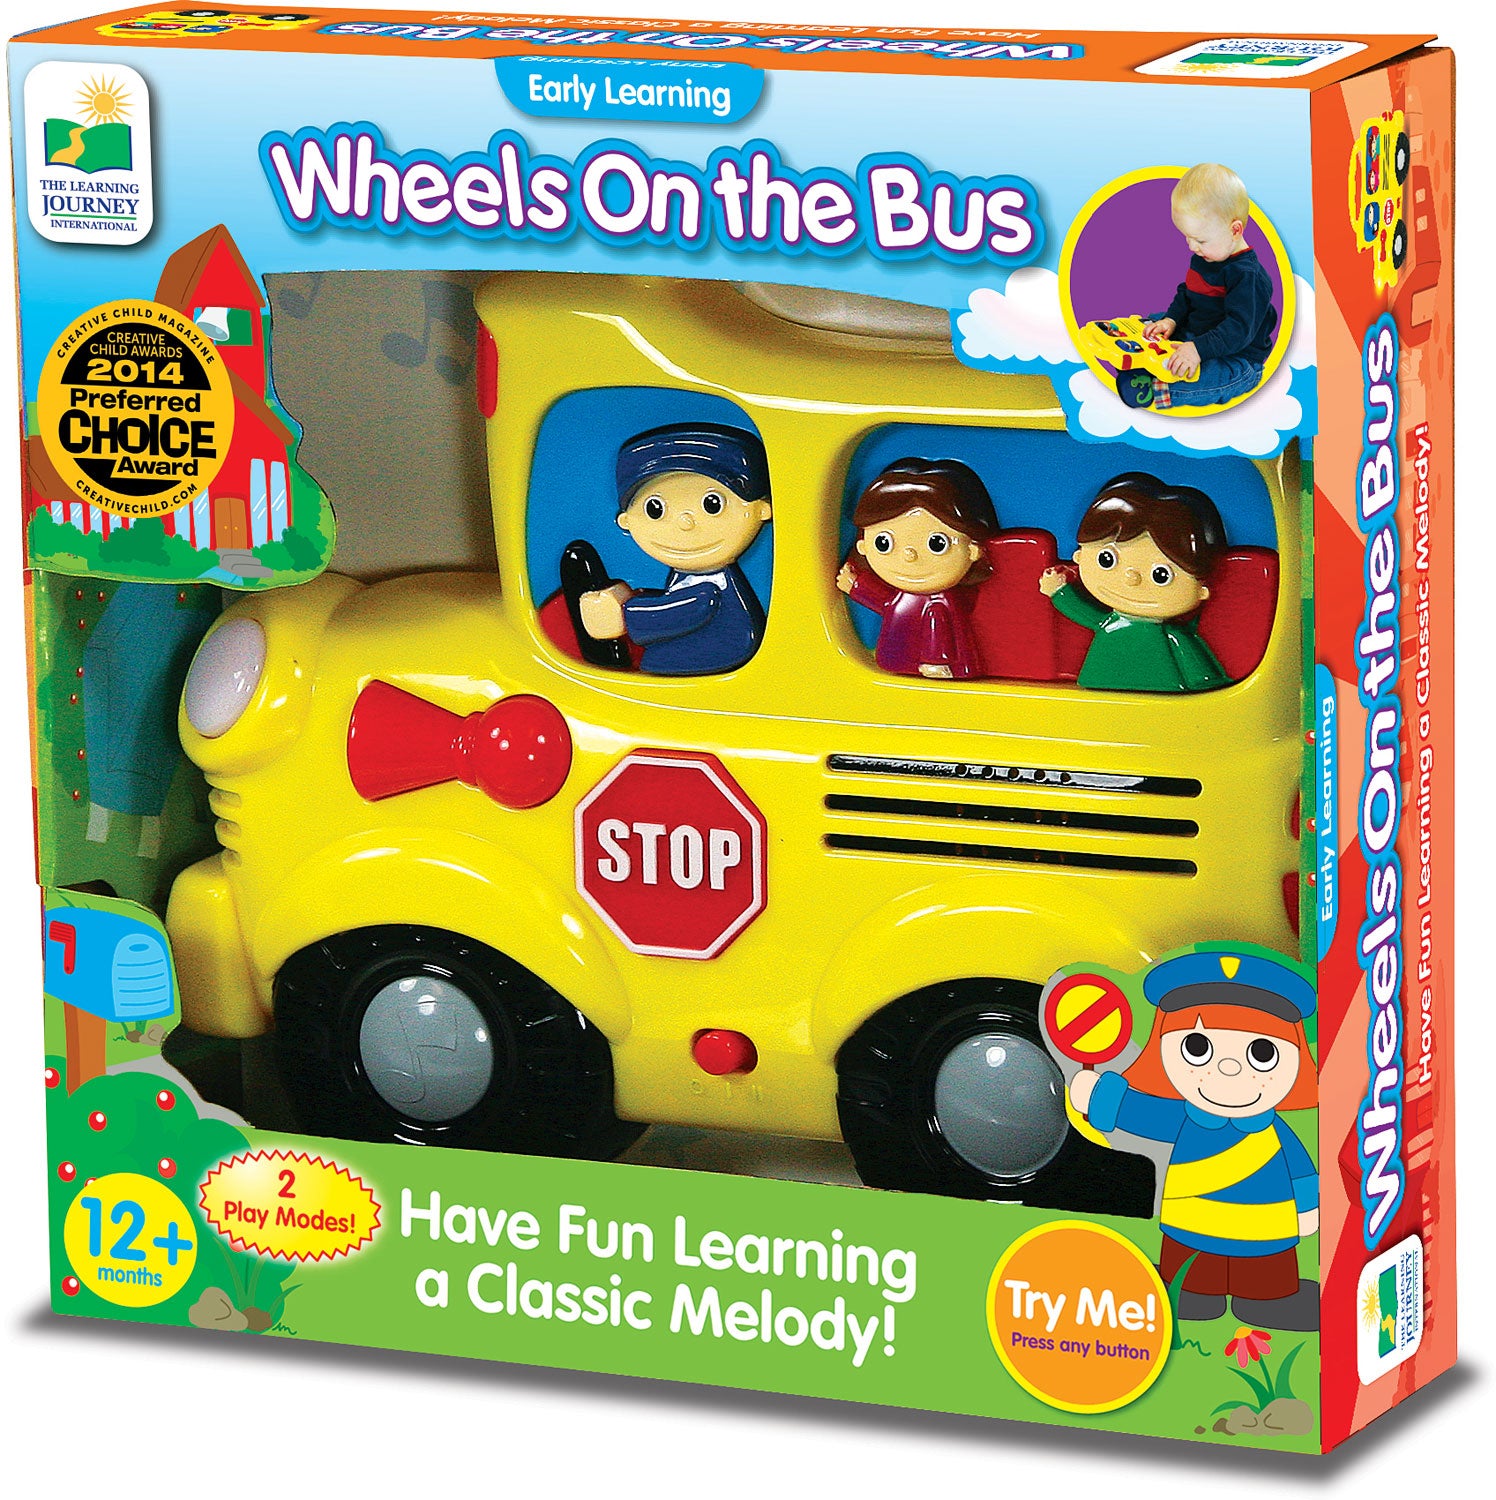 Early Learning - Wheels on the Bus